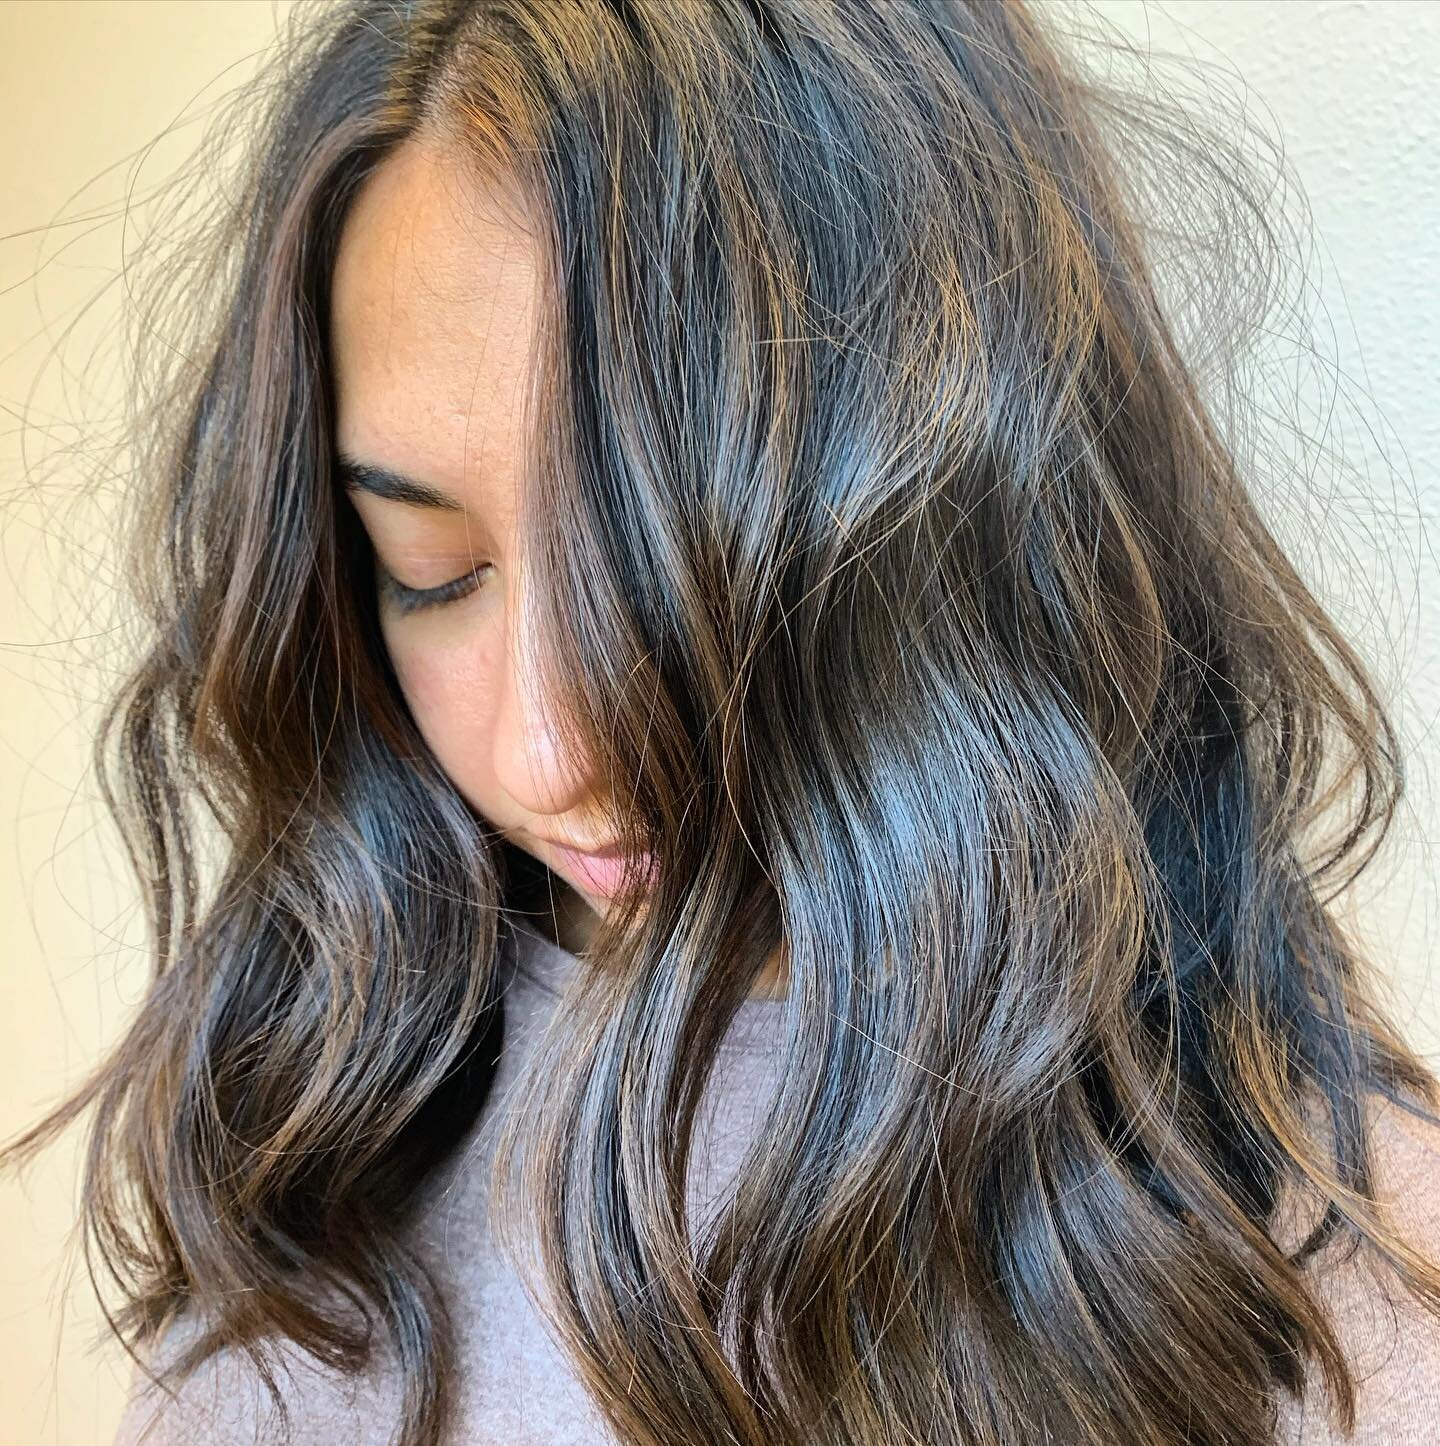 Adding dimension or highlights in hair doesn&rsquo;t mean it has to be blonde. 
.
. 
This rich brunette got sparkles of light brown for a low maintenance sophisticated look✨
.
.
Info@rosamercedesbeauty.com